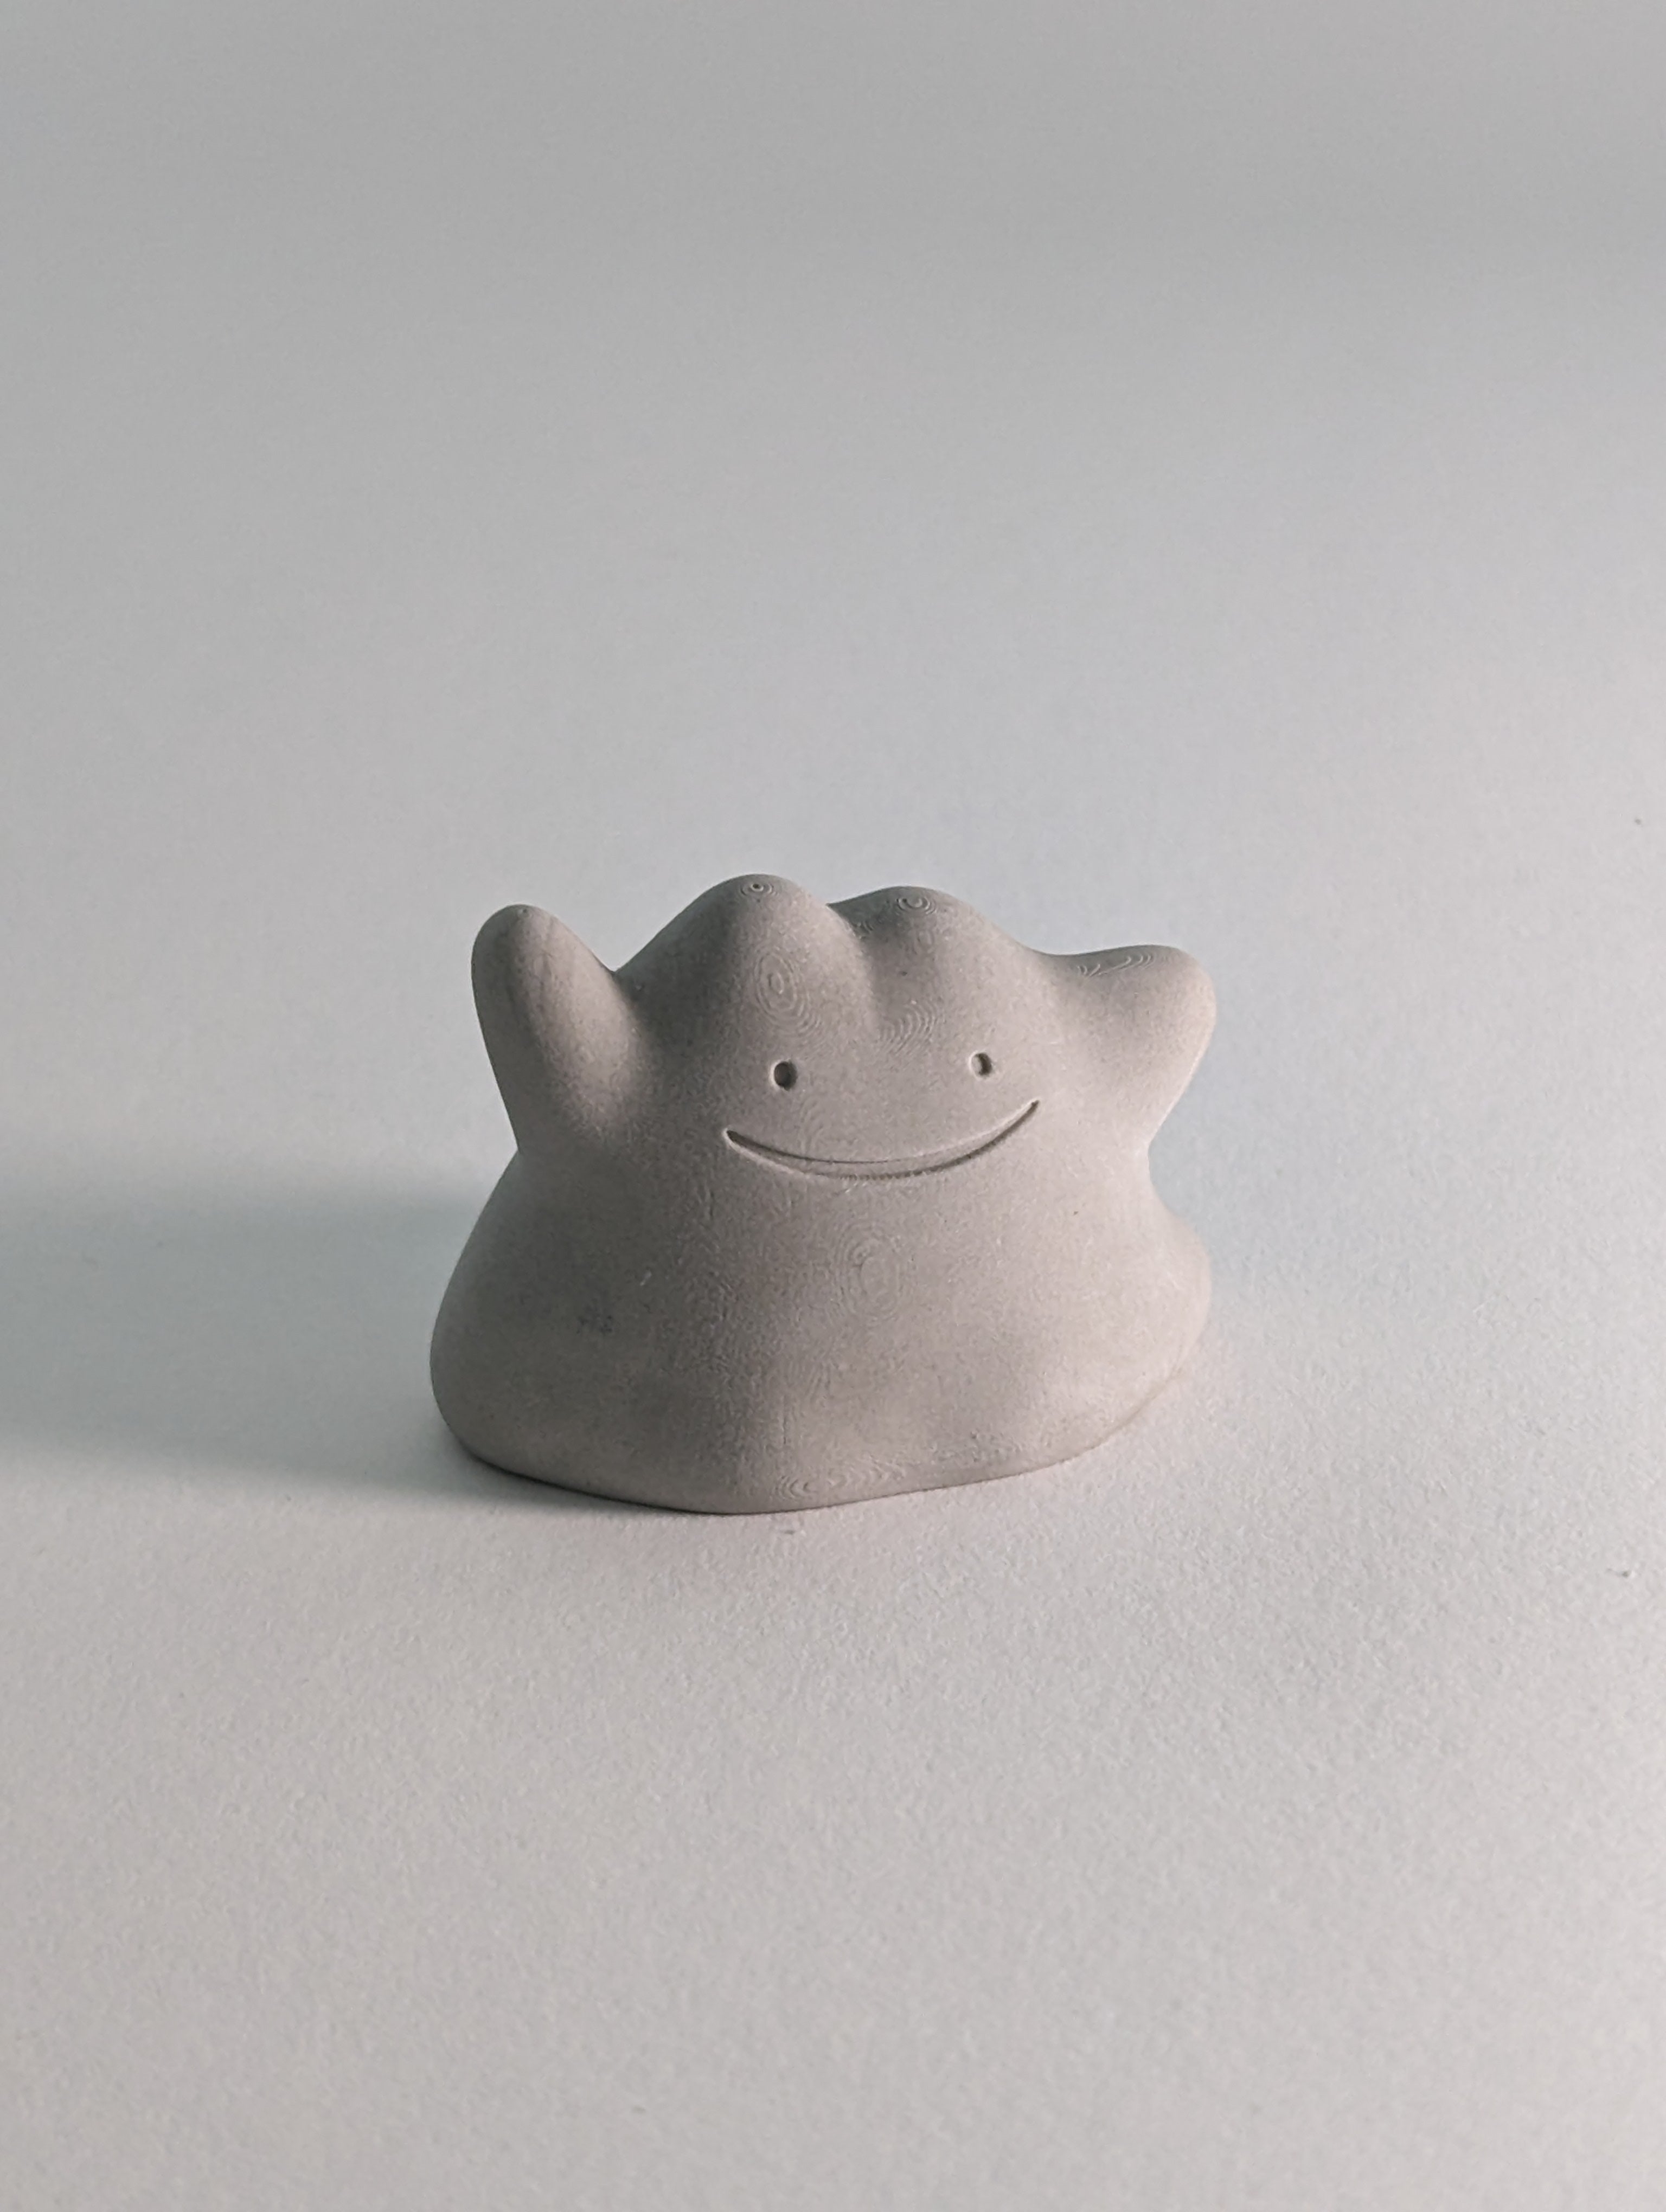 Ditto-Pokemon ghost 3D model 3D printable